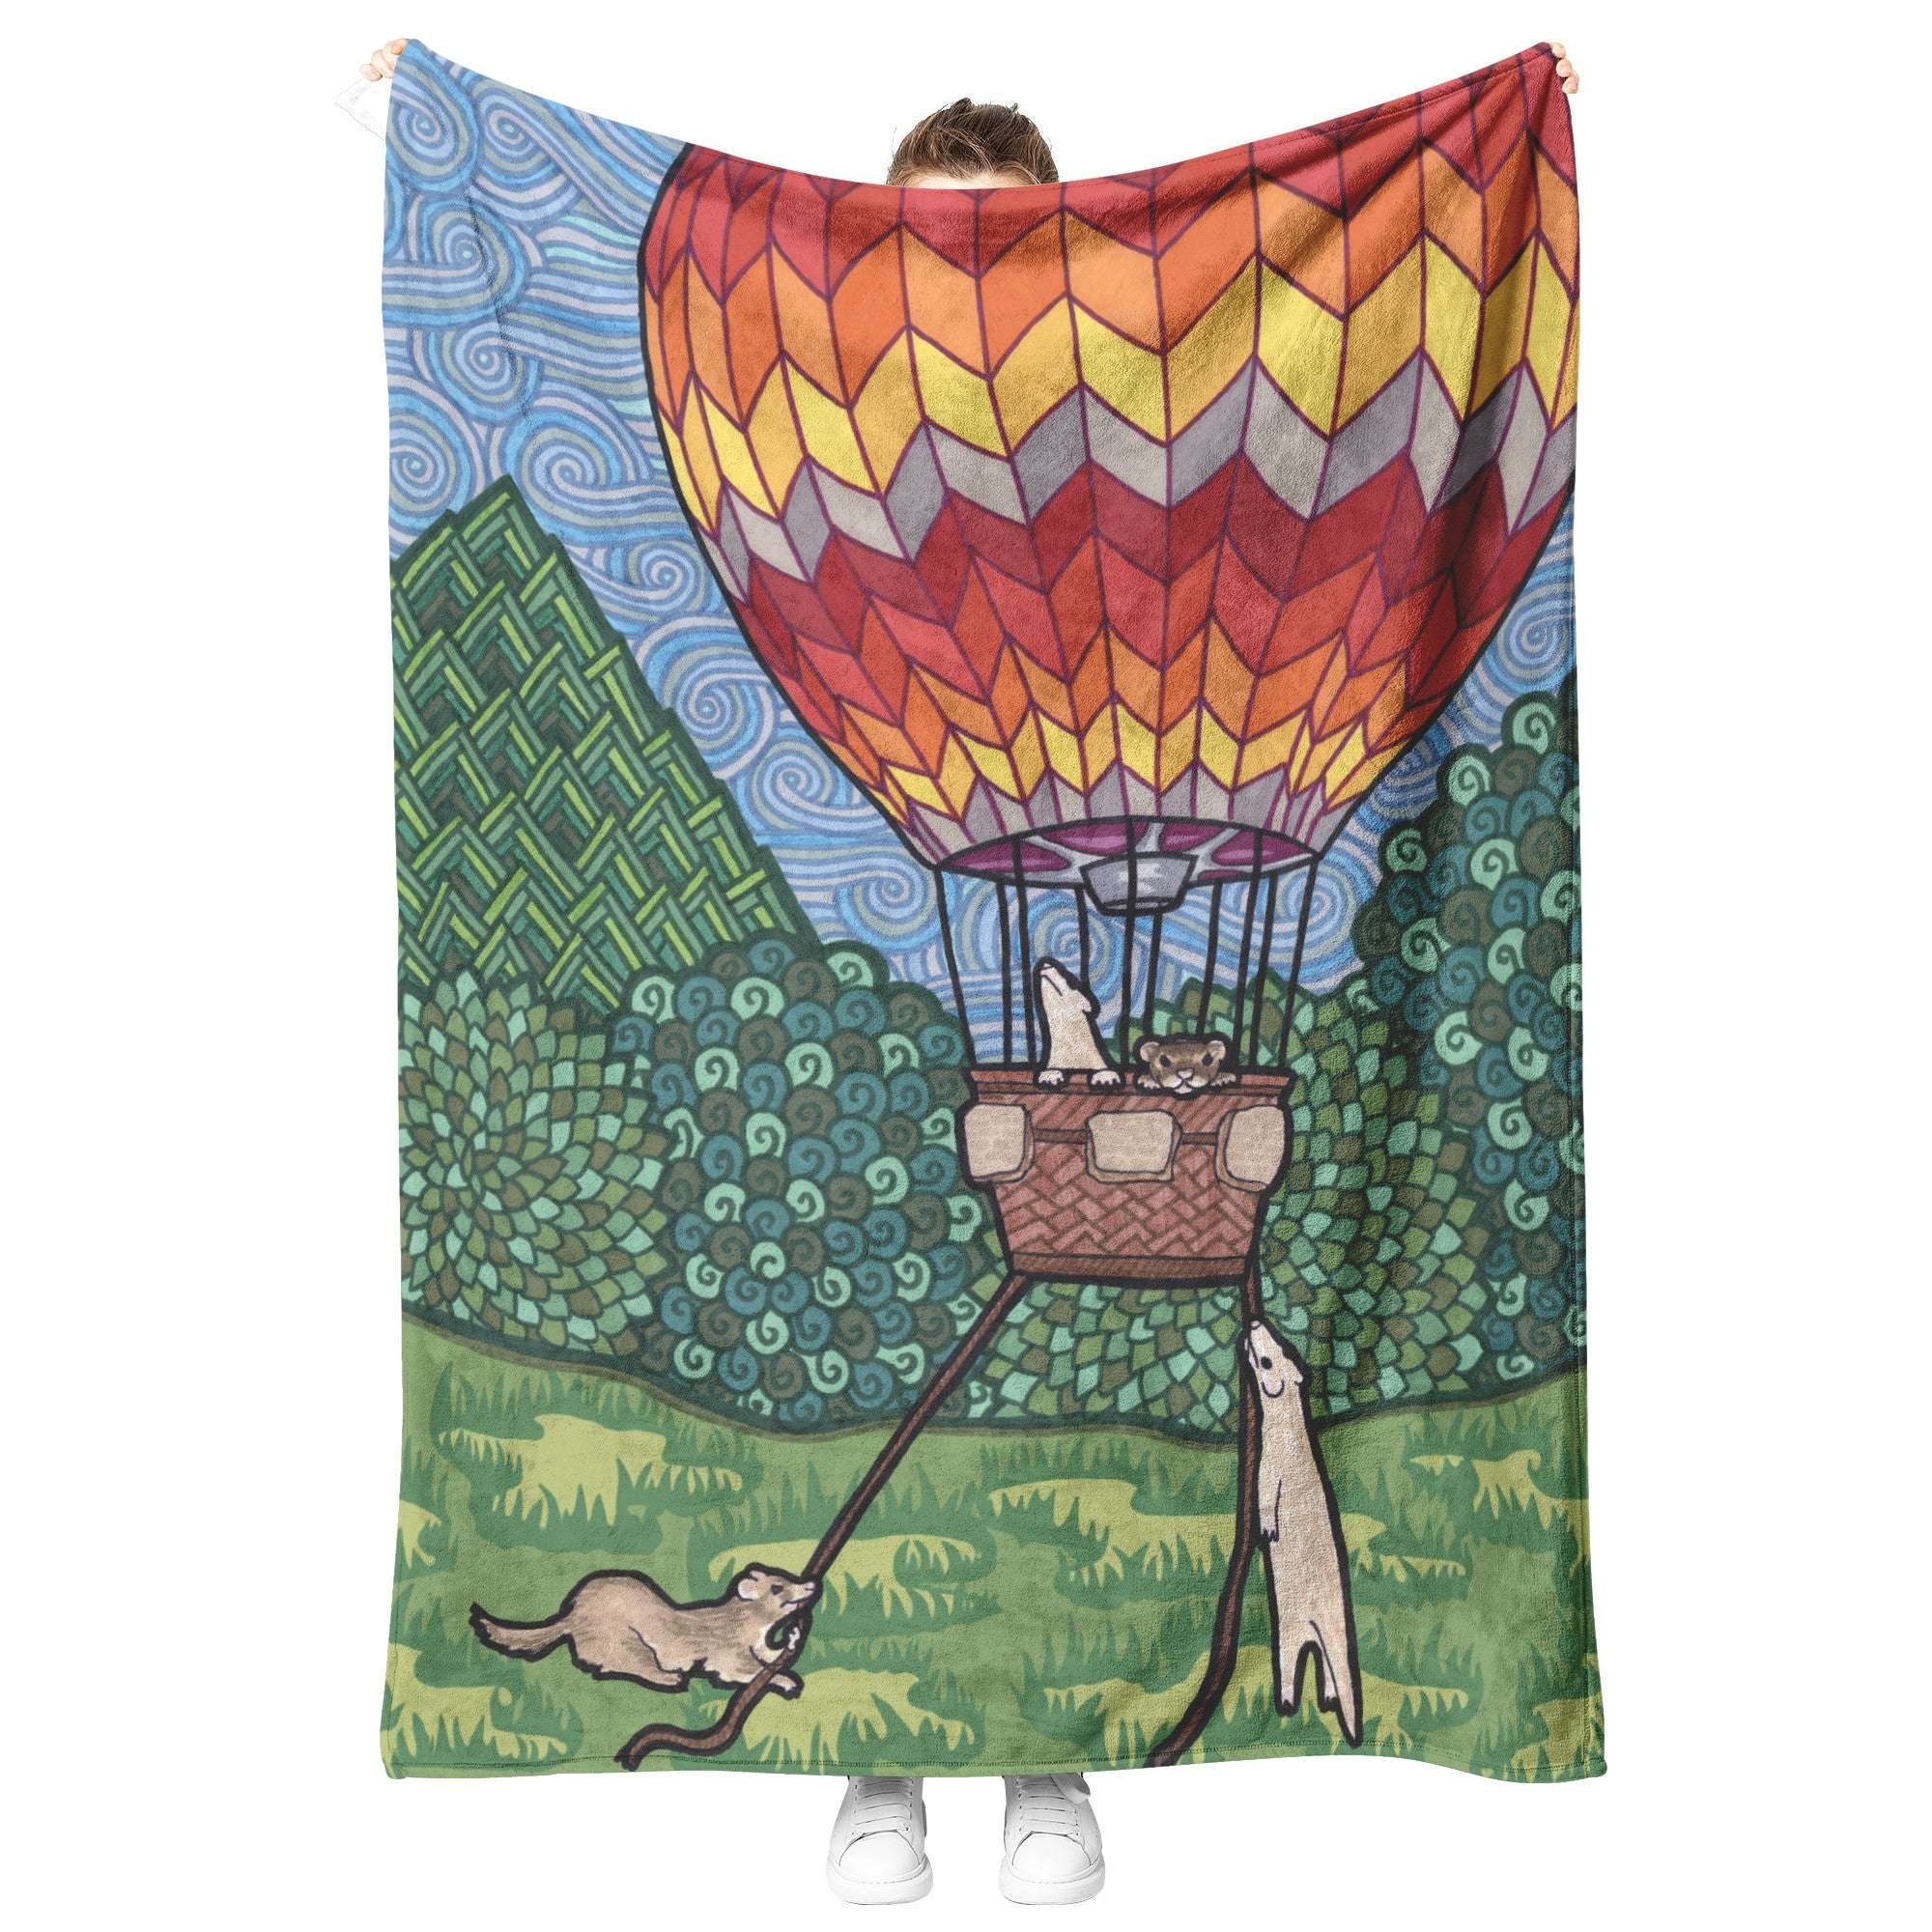 A person's holding up a Ferret Blanket, with whimsical designs featuring ferrets in a hot air balloon and stylized landscape.